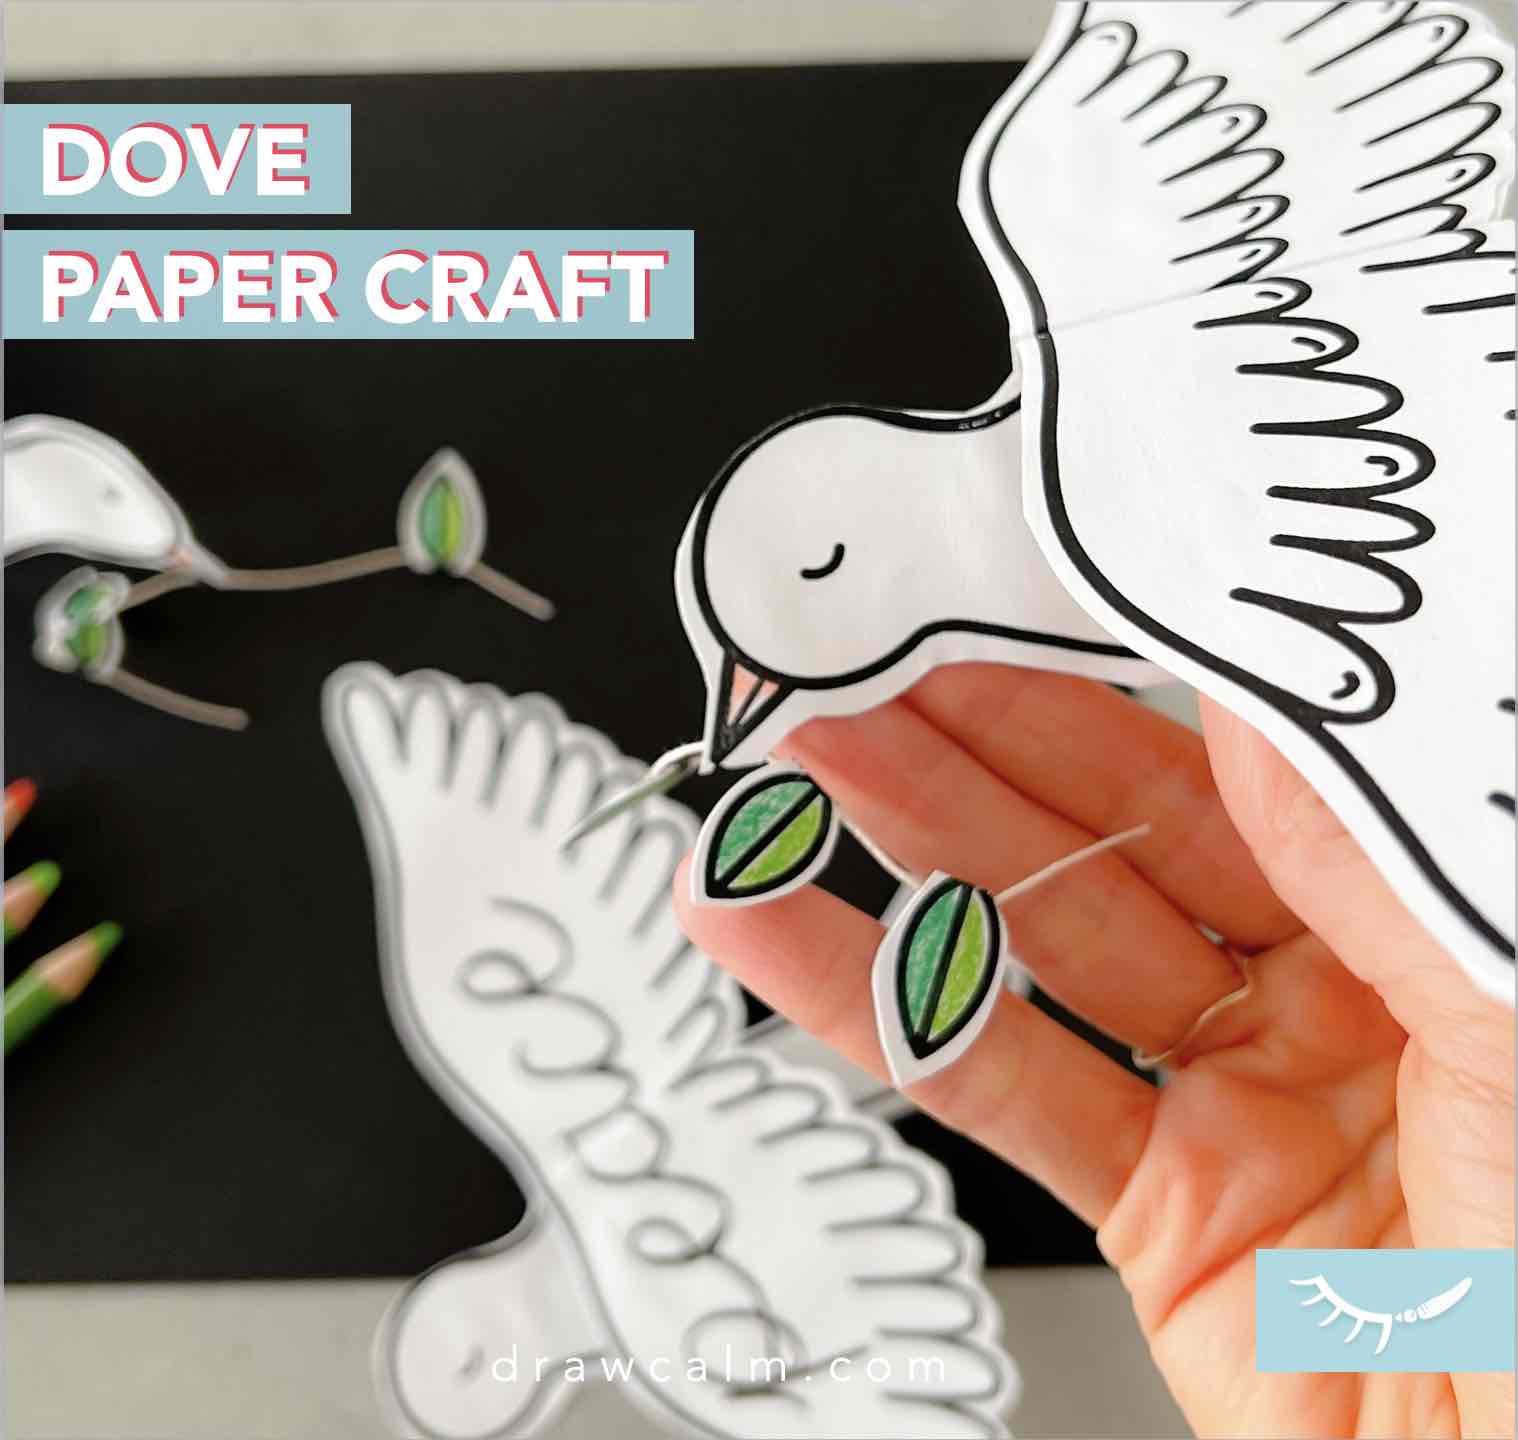 Printable instructions on how to make a bird in paper. Download has dove coloring page and instructions included.